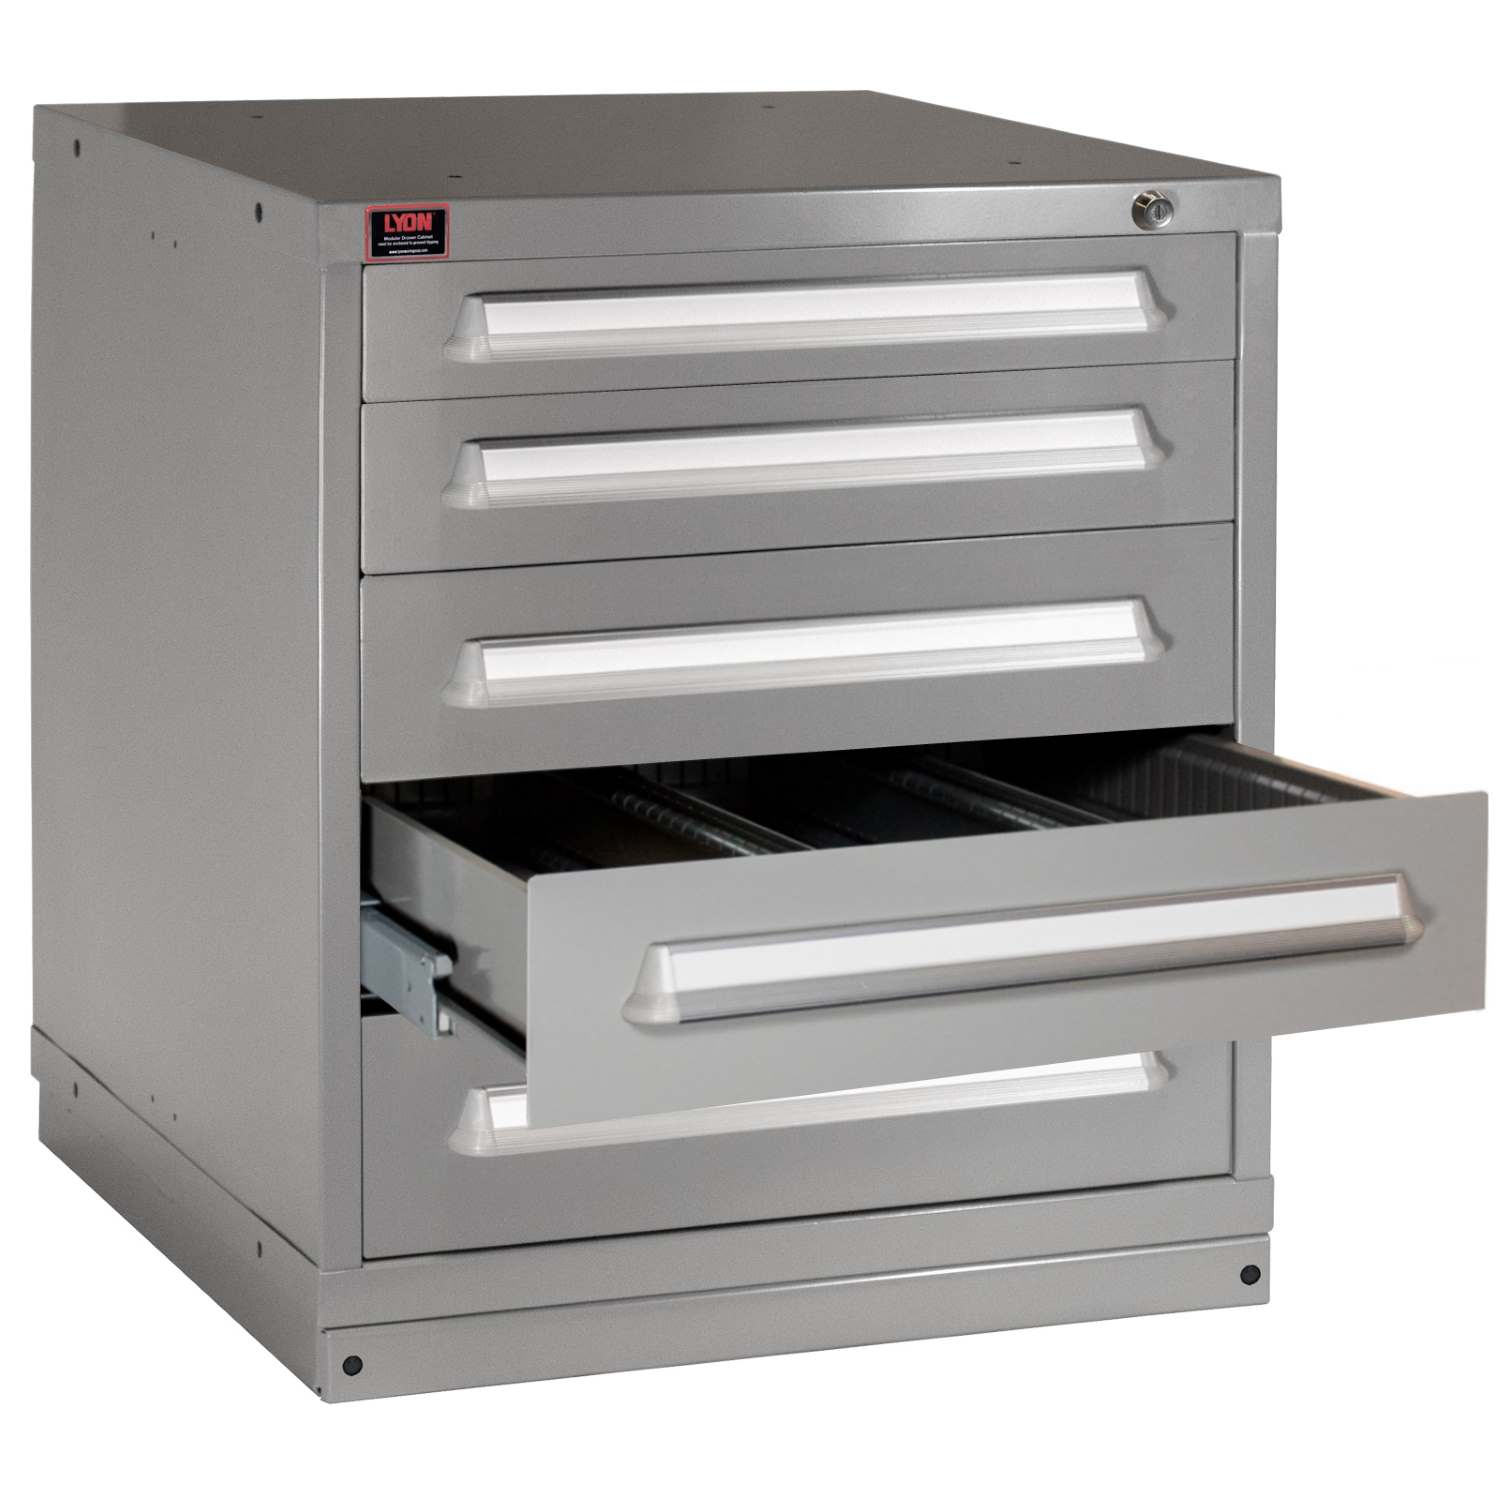 Cabinets with single drawer access allow only one drawer to be open at one time.